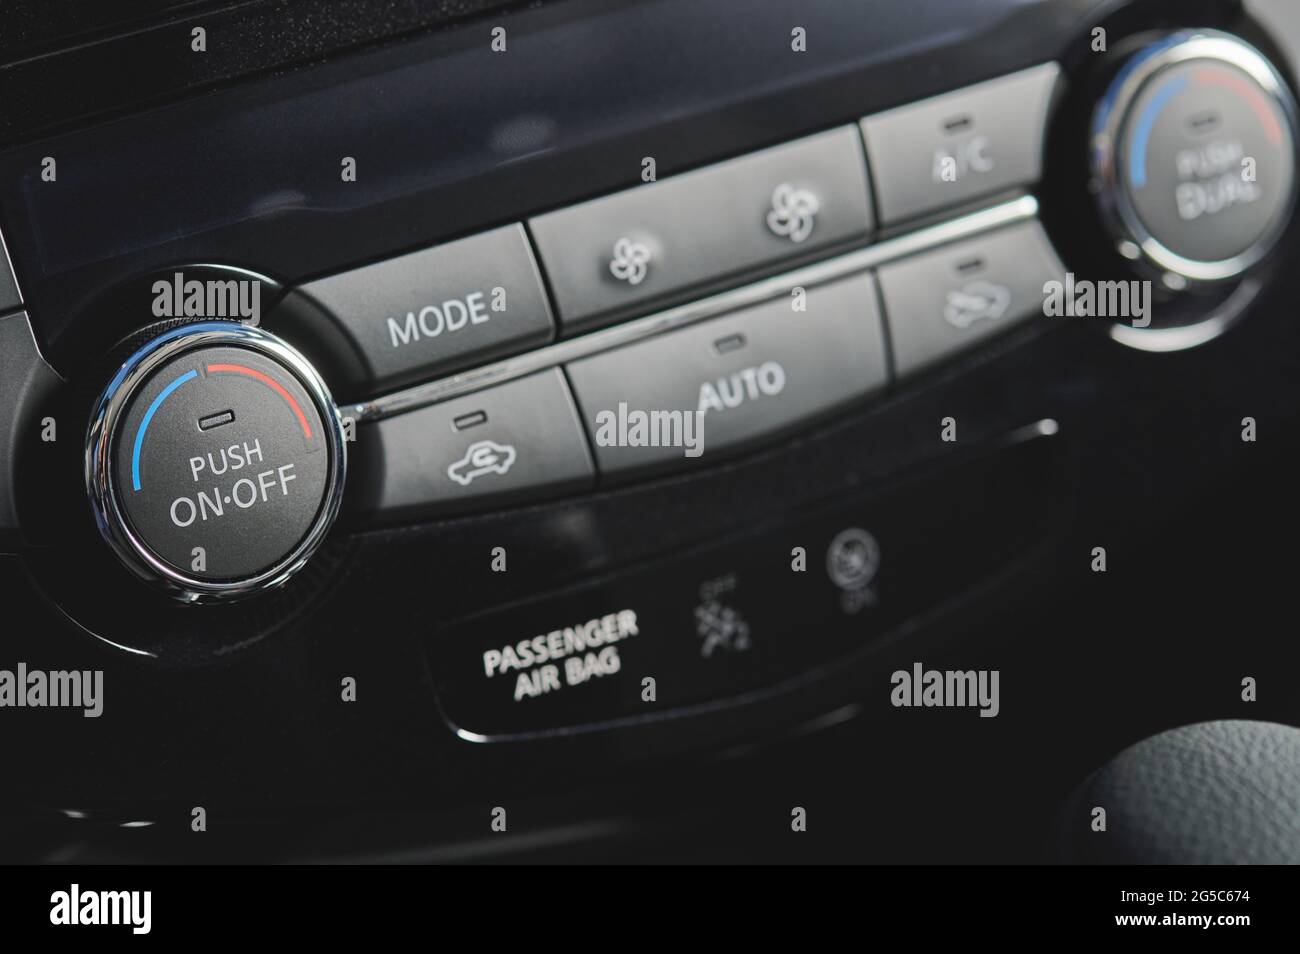 Modern car climate control system close up view Stock Photo